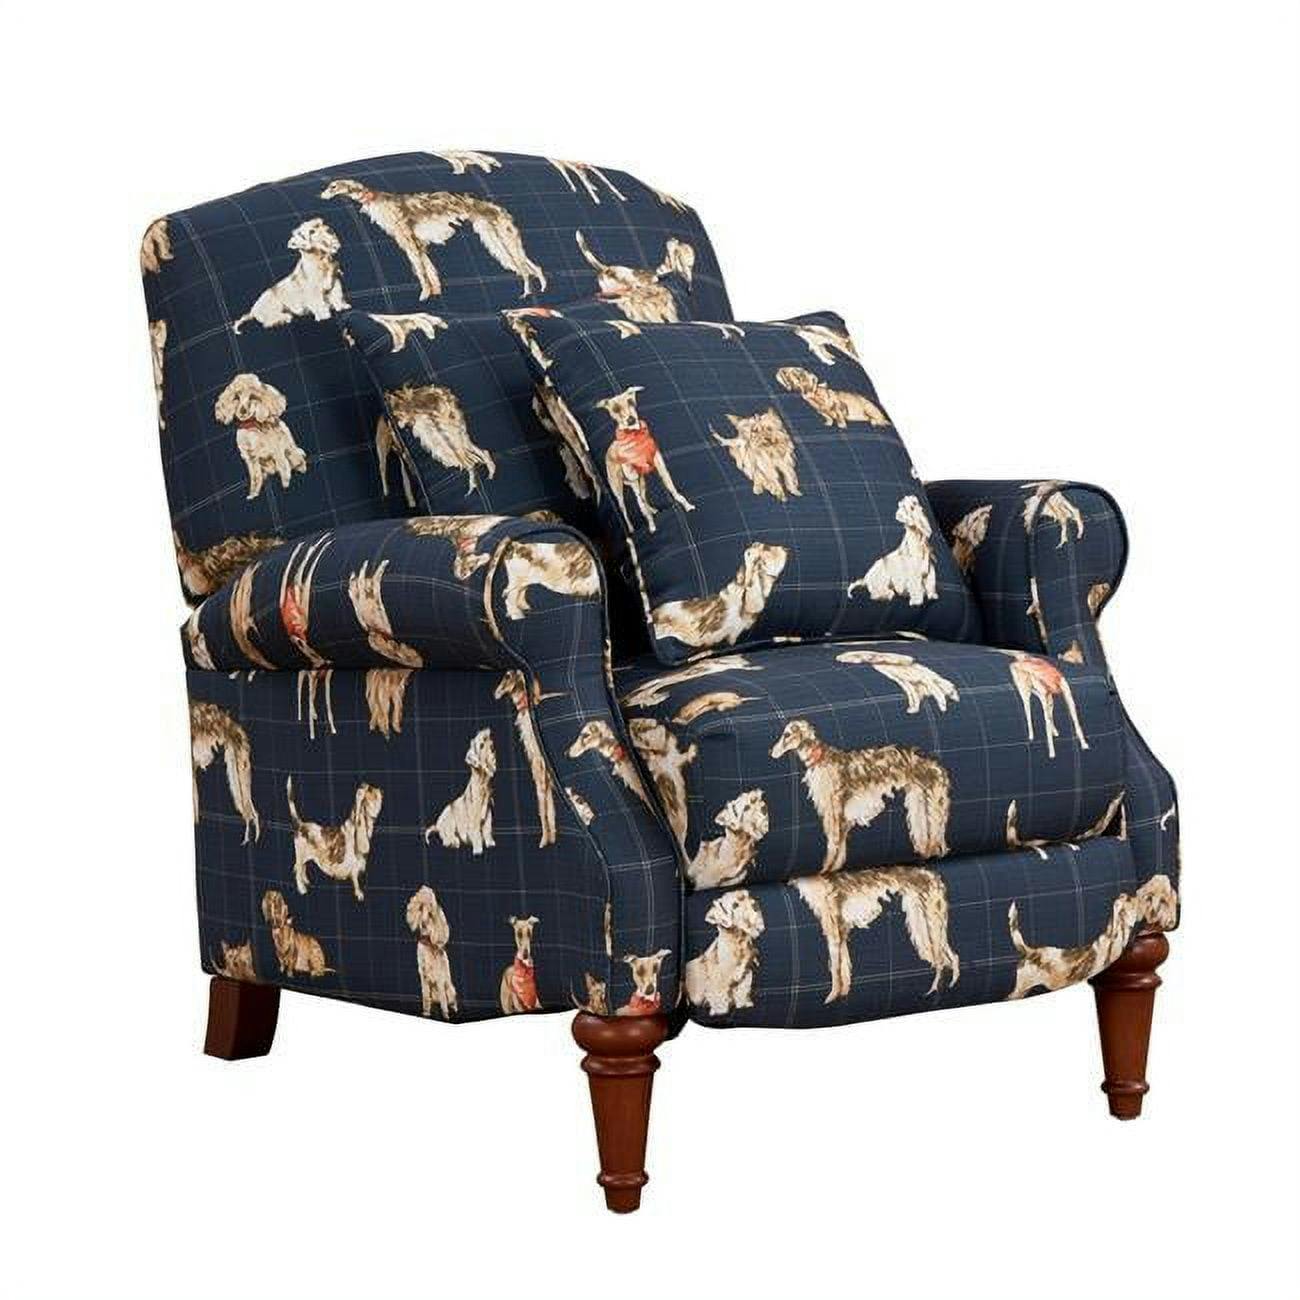 Cherry Wood Classic Recliner in Blue with Adorable Dog Motif and Matching Pillows